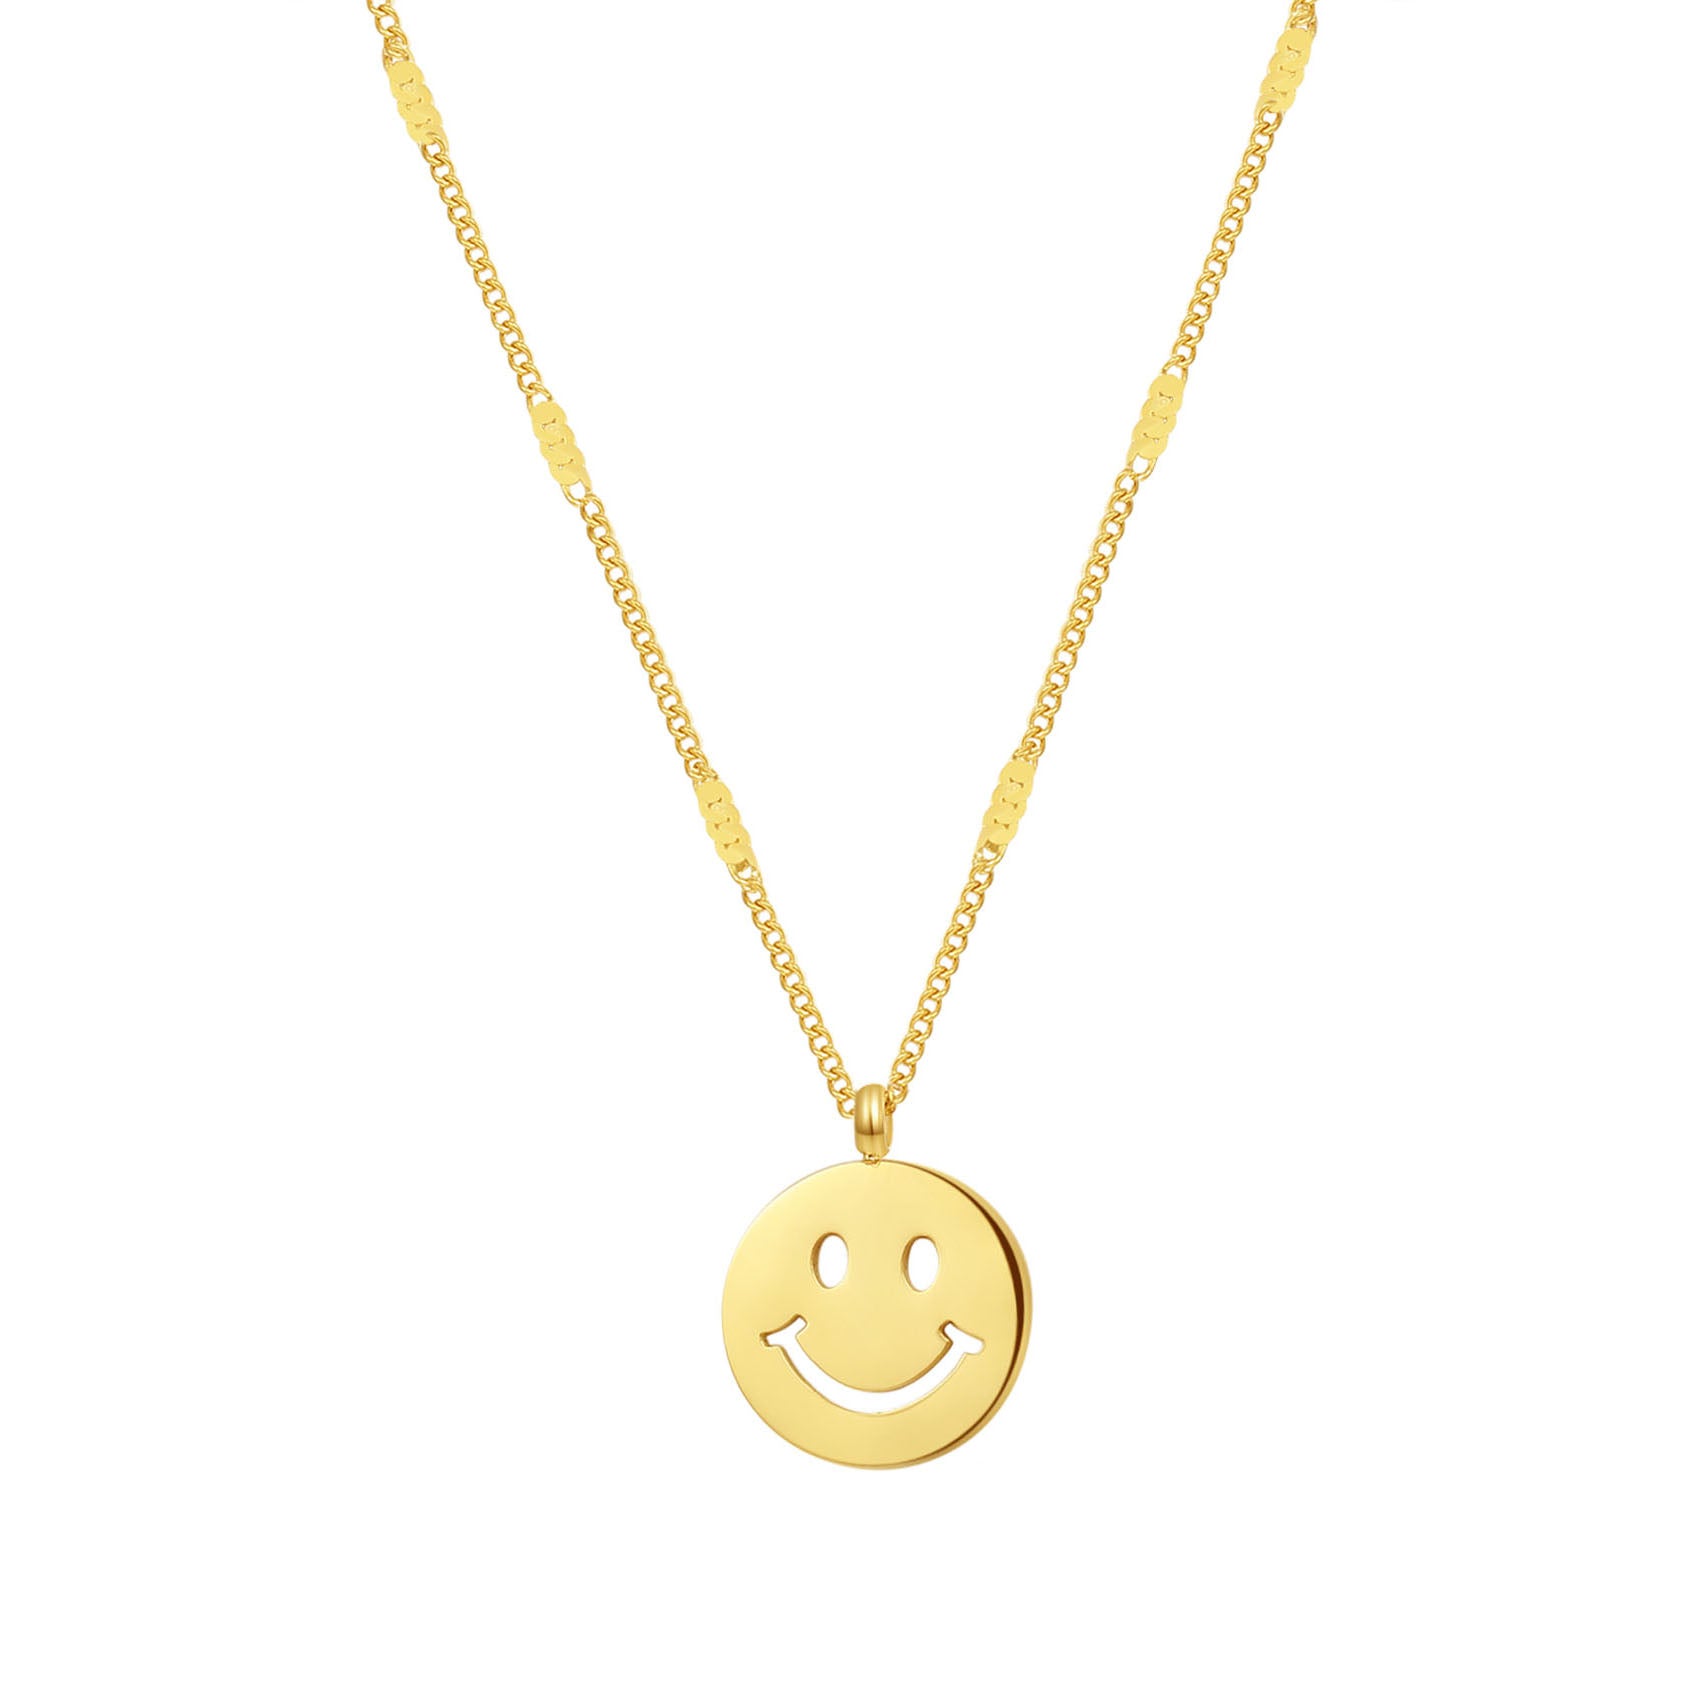 Kette Smiley Gesicht Anhänger Sterlingsilber Hey Gold in Happiness –